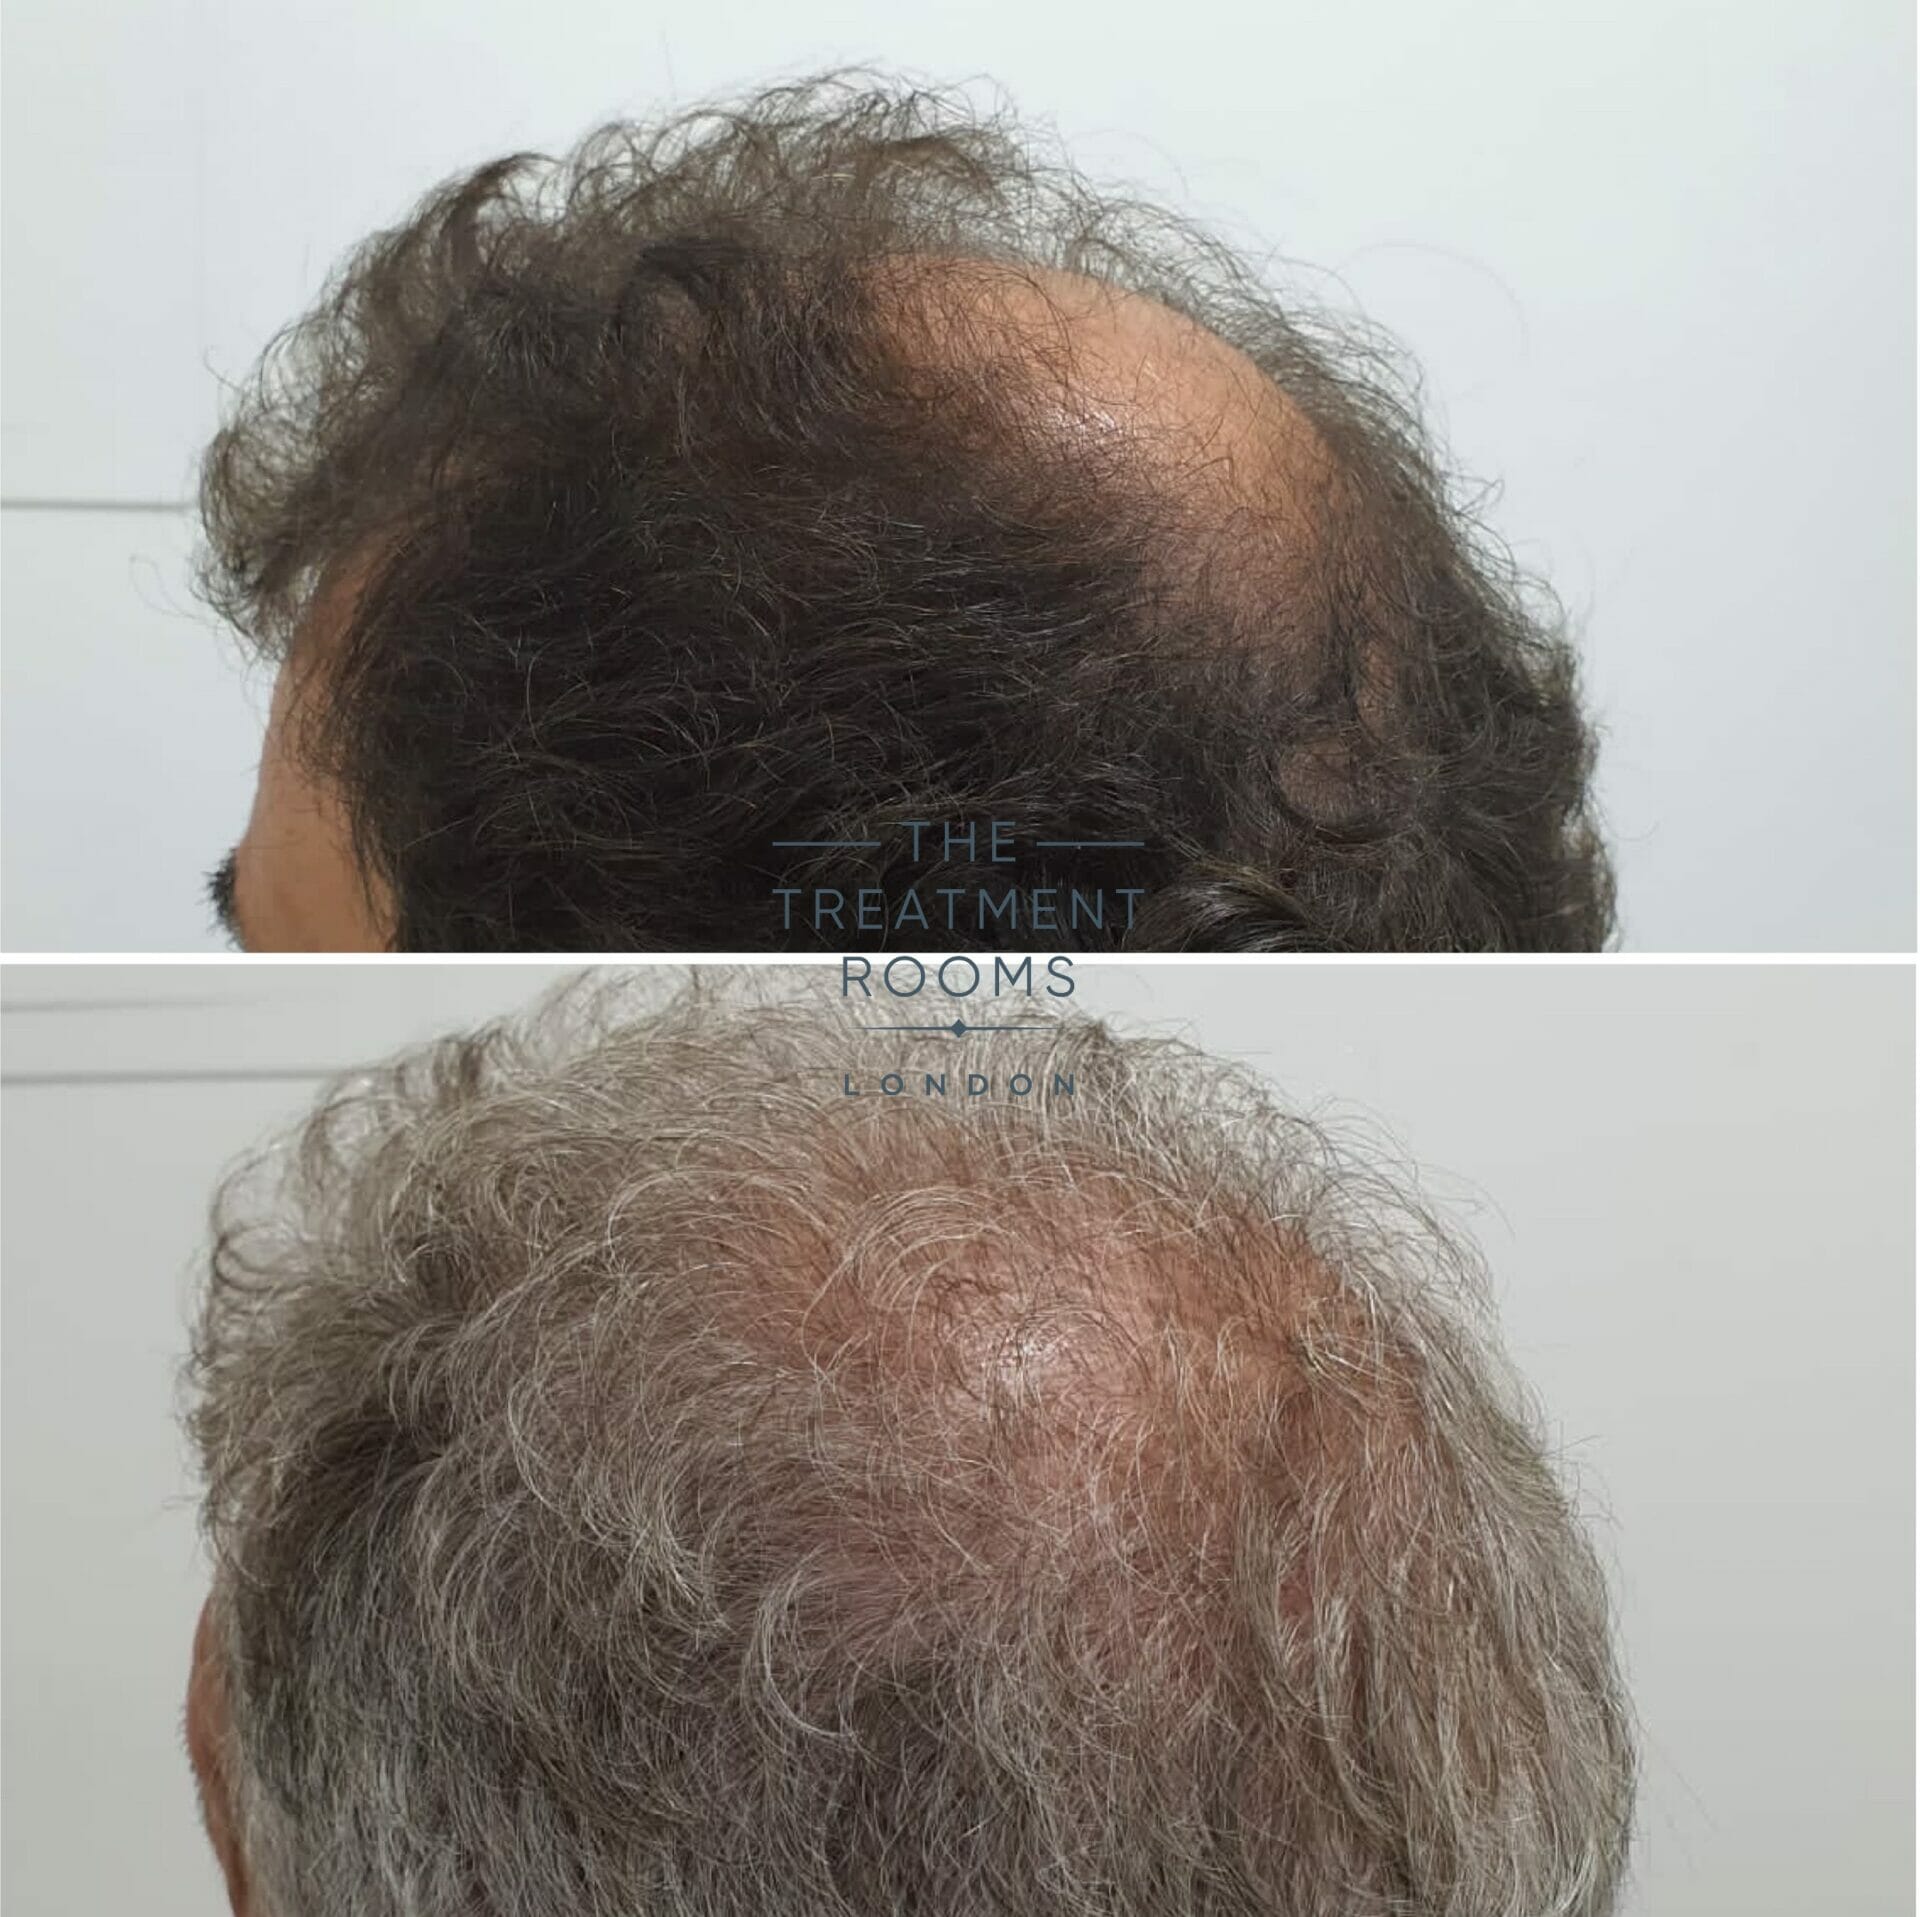 Grey hair crown transplant before and after 2110 grafts